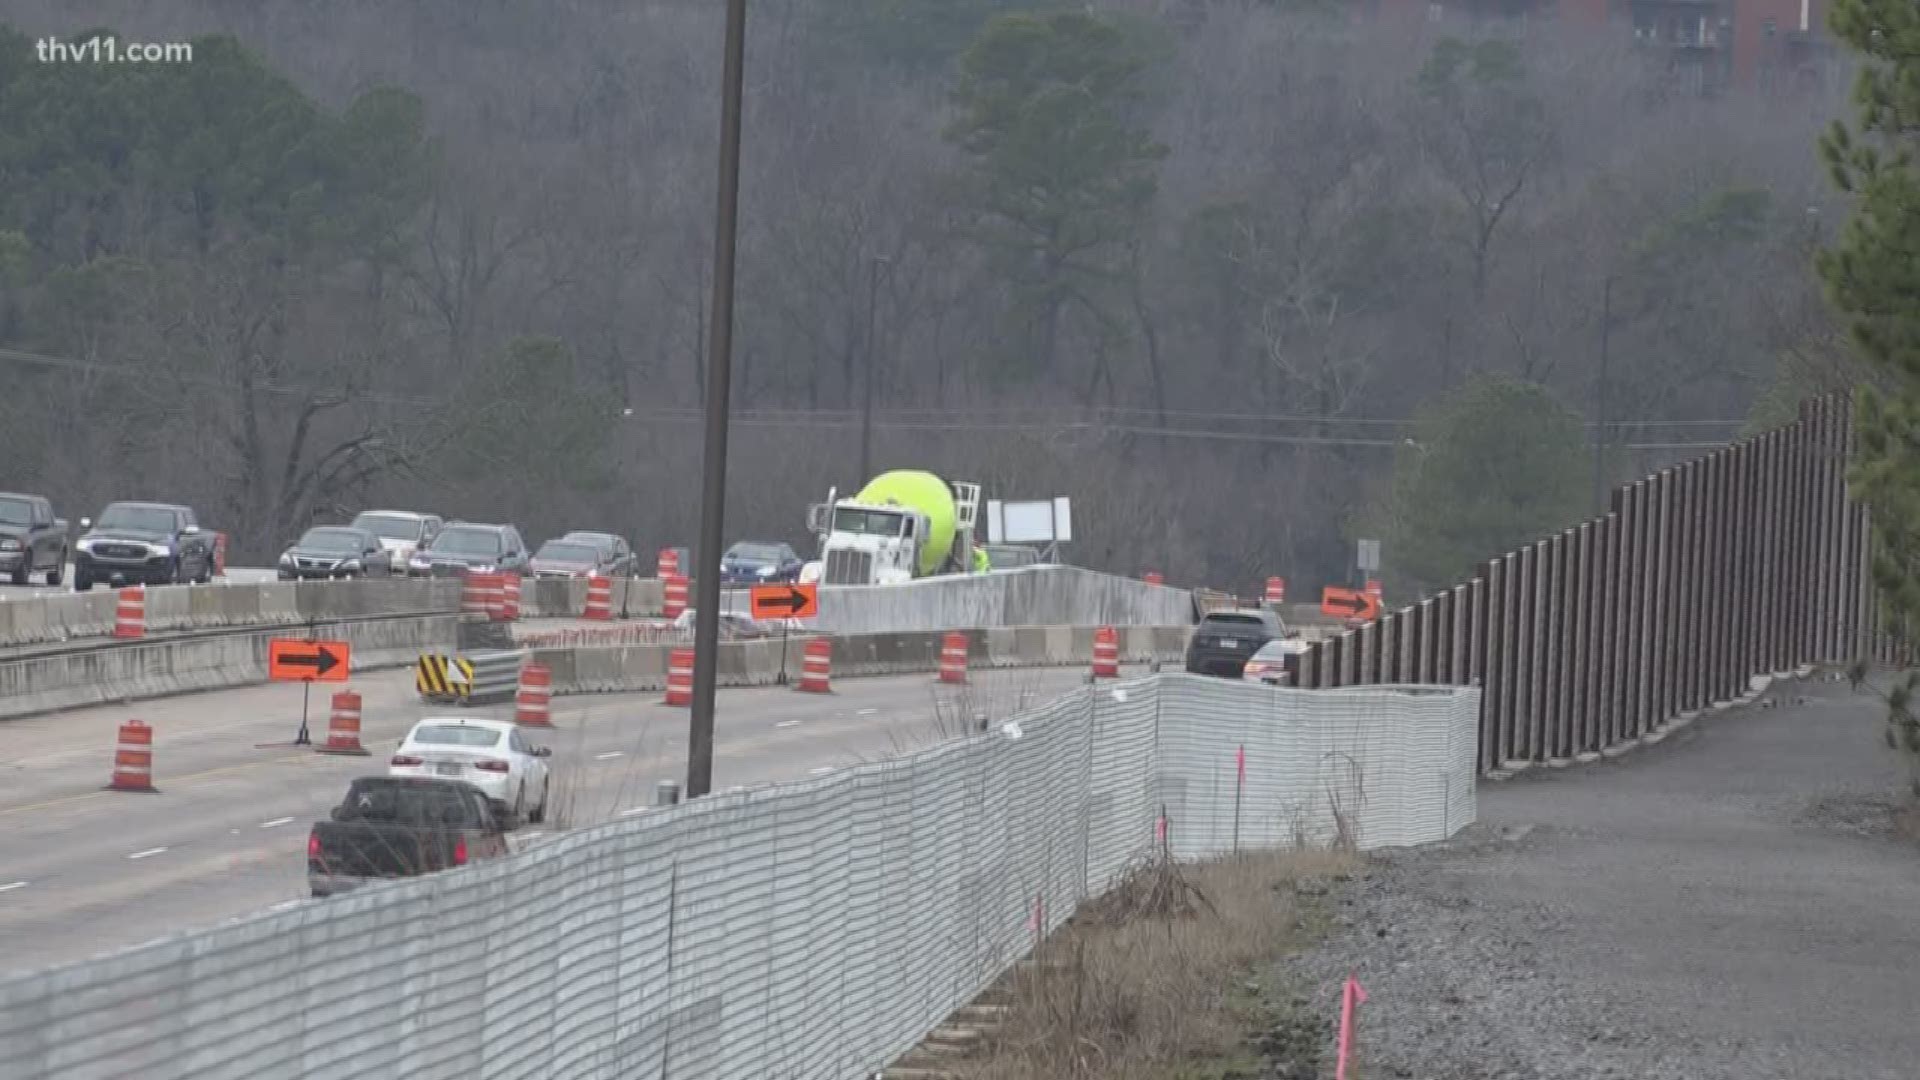 If you've been held up in traffic on I-630, we have some good news. The end of construction is near. But, you still have some traffic to get through in the meantime.